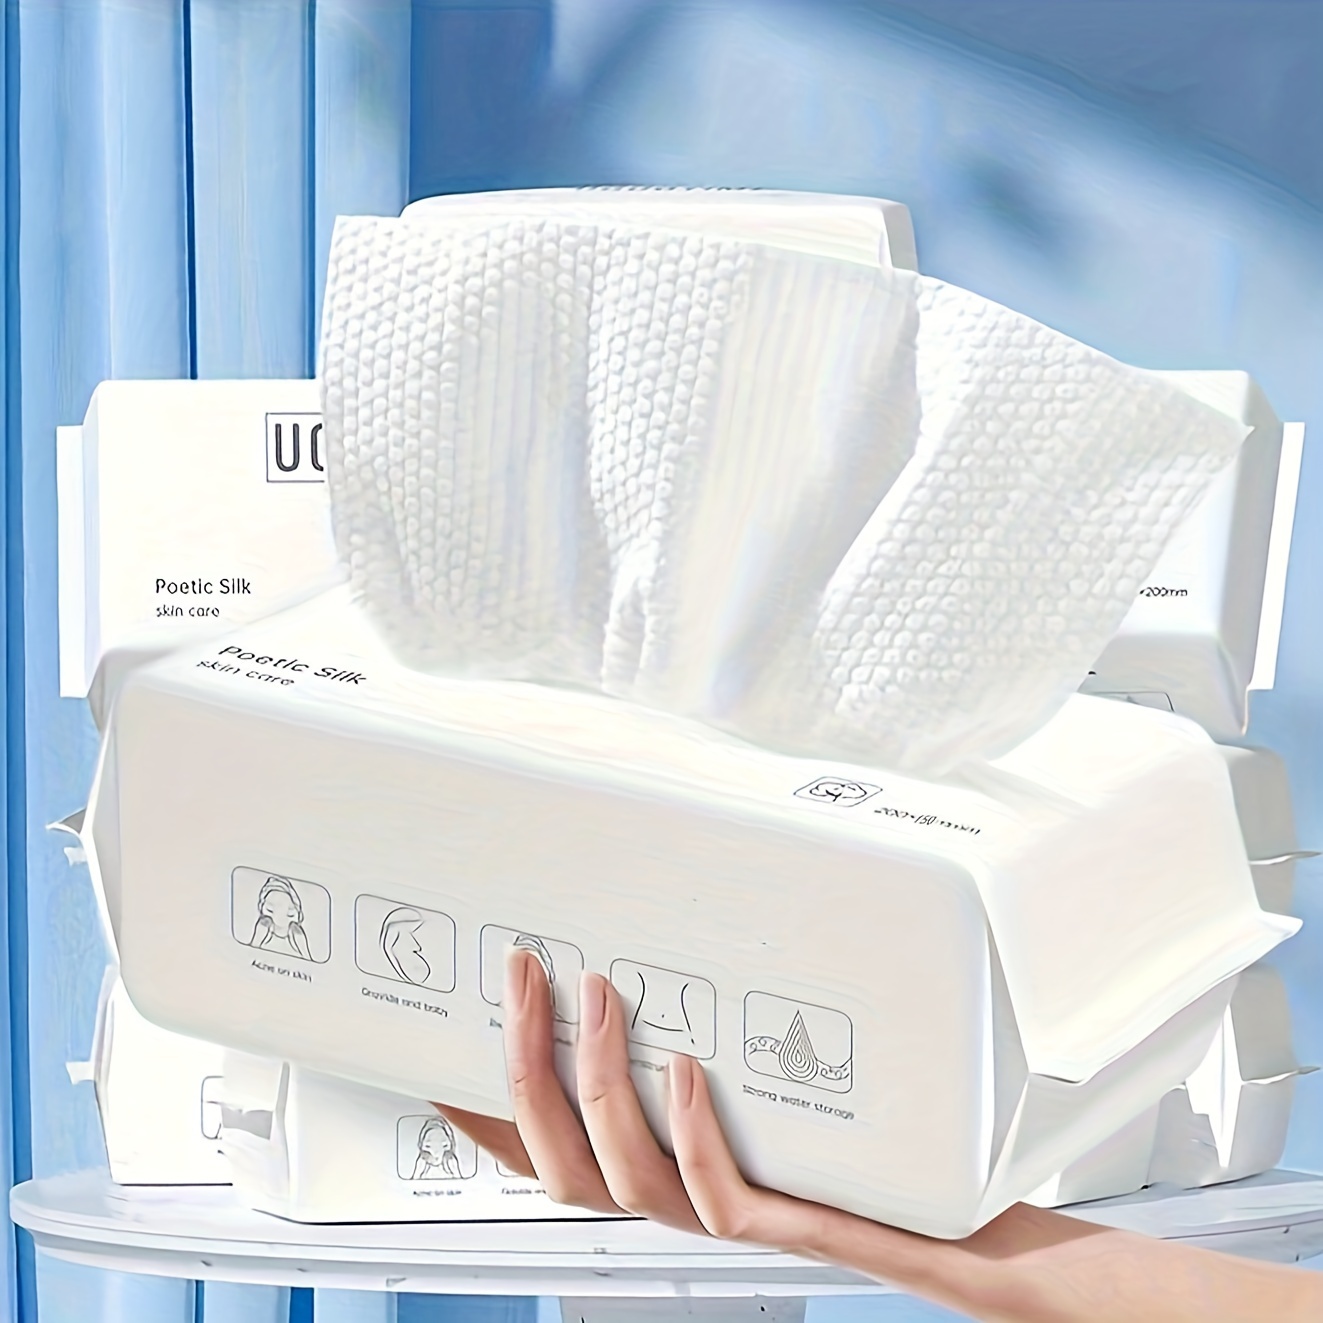 

Disposable Facial Towel For Sensitive Skin - Dye Free Paper Towels For Cleansing, Skincare, Makeup Removal - Individual Sheet Form For Wet And Dry Use - Ideal For Restaurants, Hotels, Commercial Use